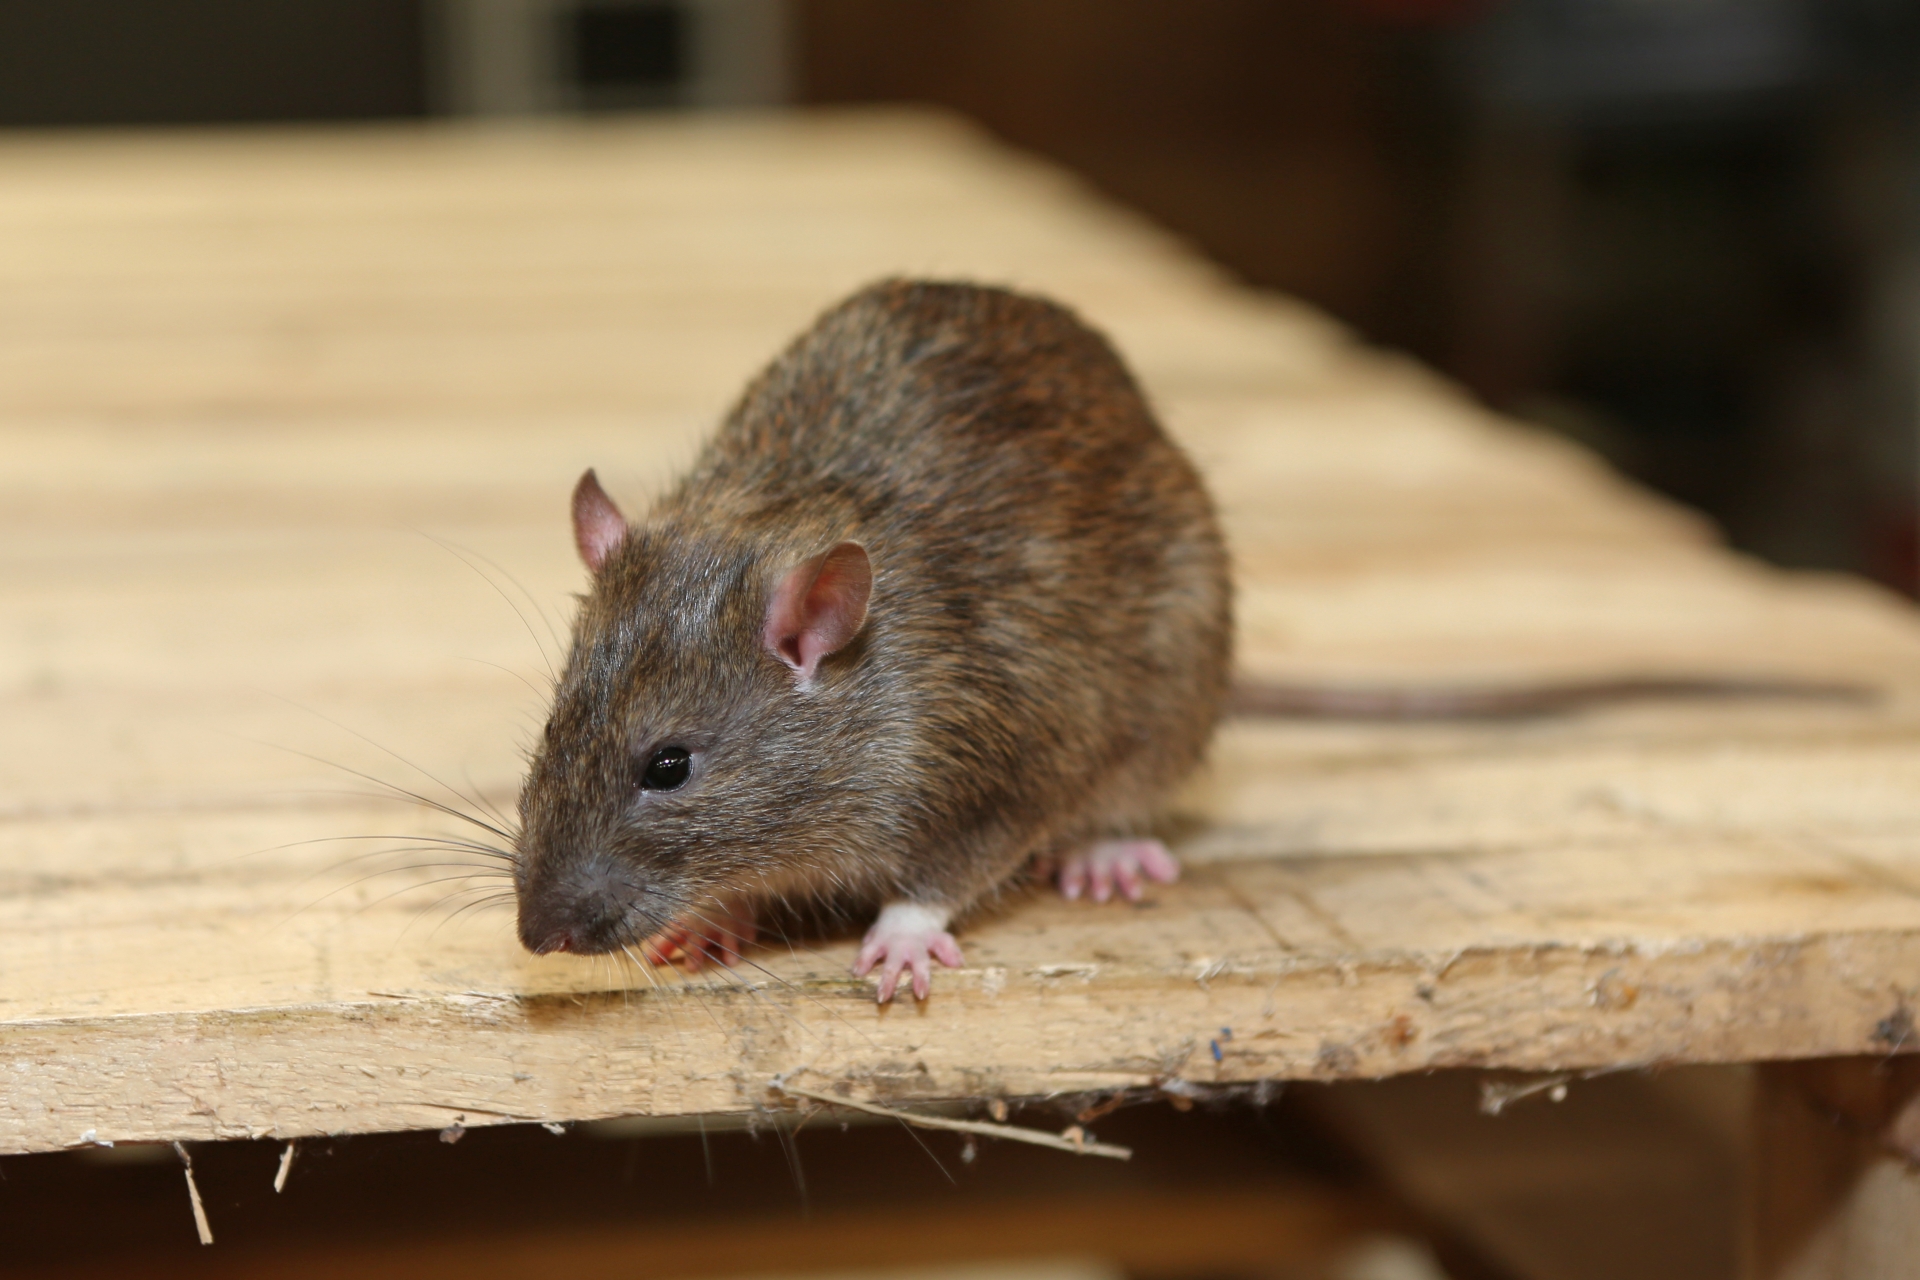 Rat Infestation, Pest Control in Tufnell Park, N19. Call Now 020 8166 9746